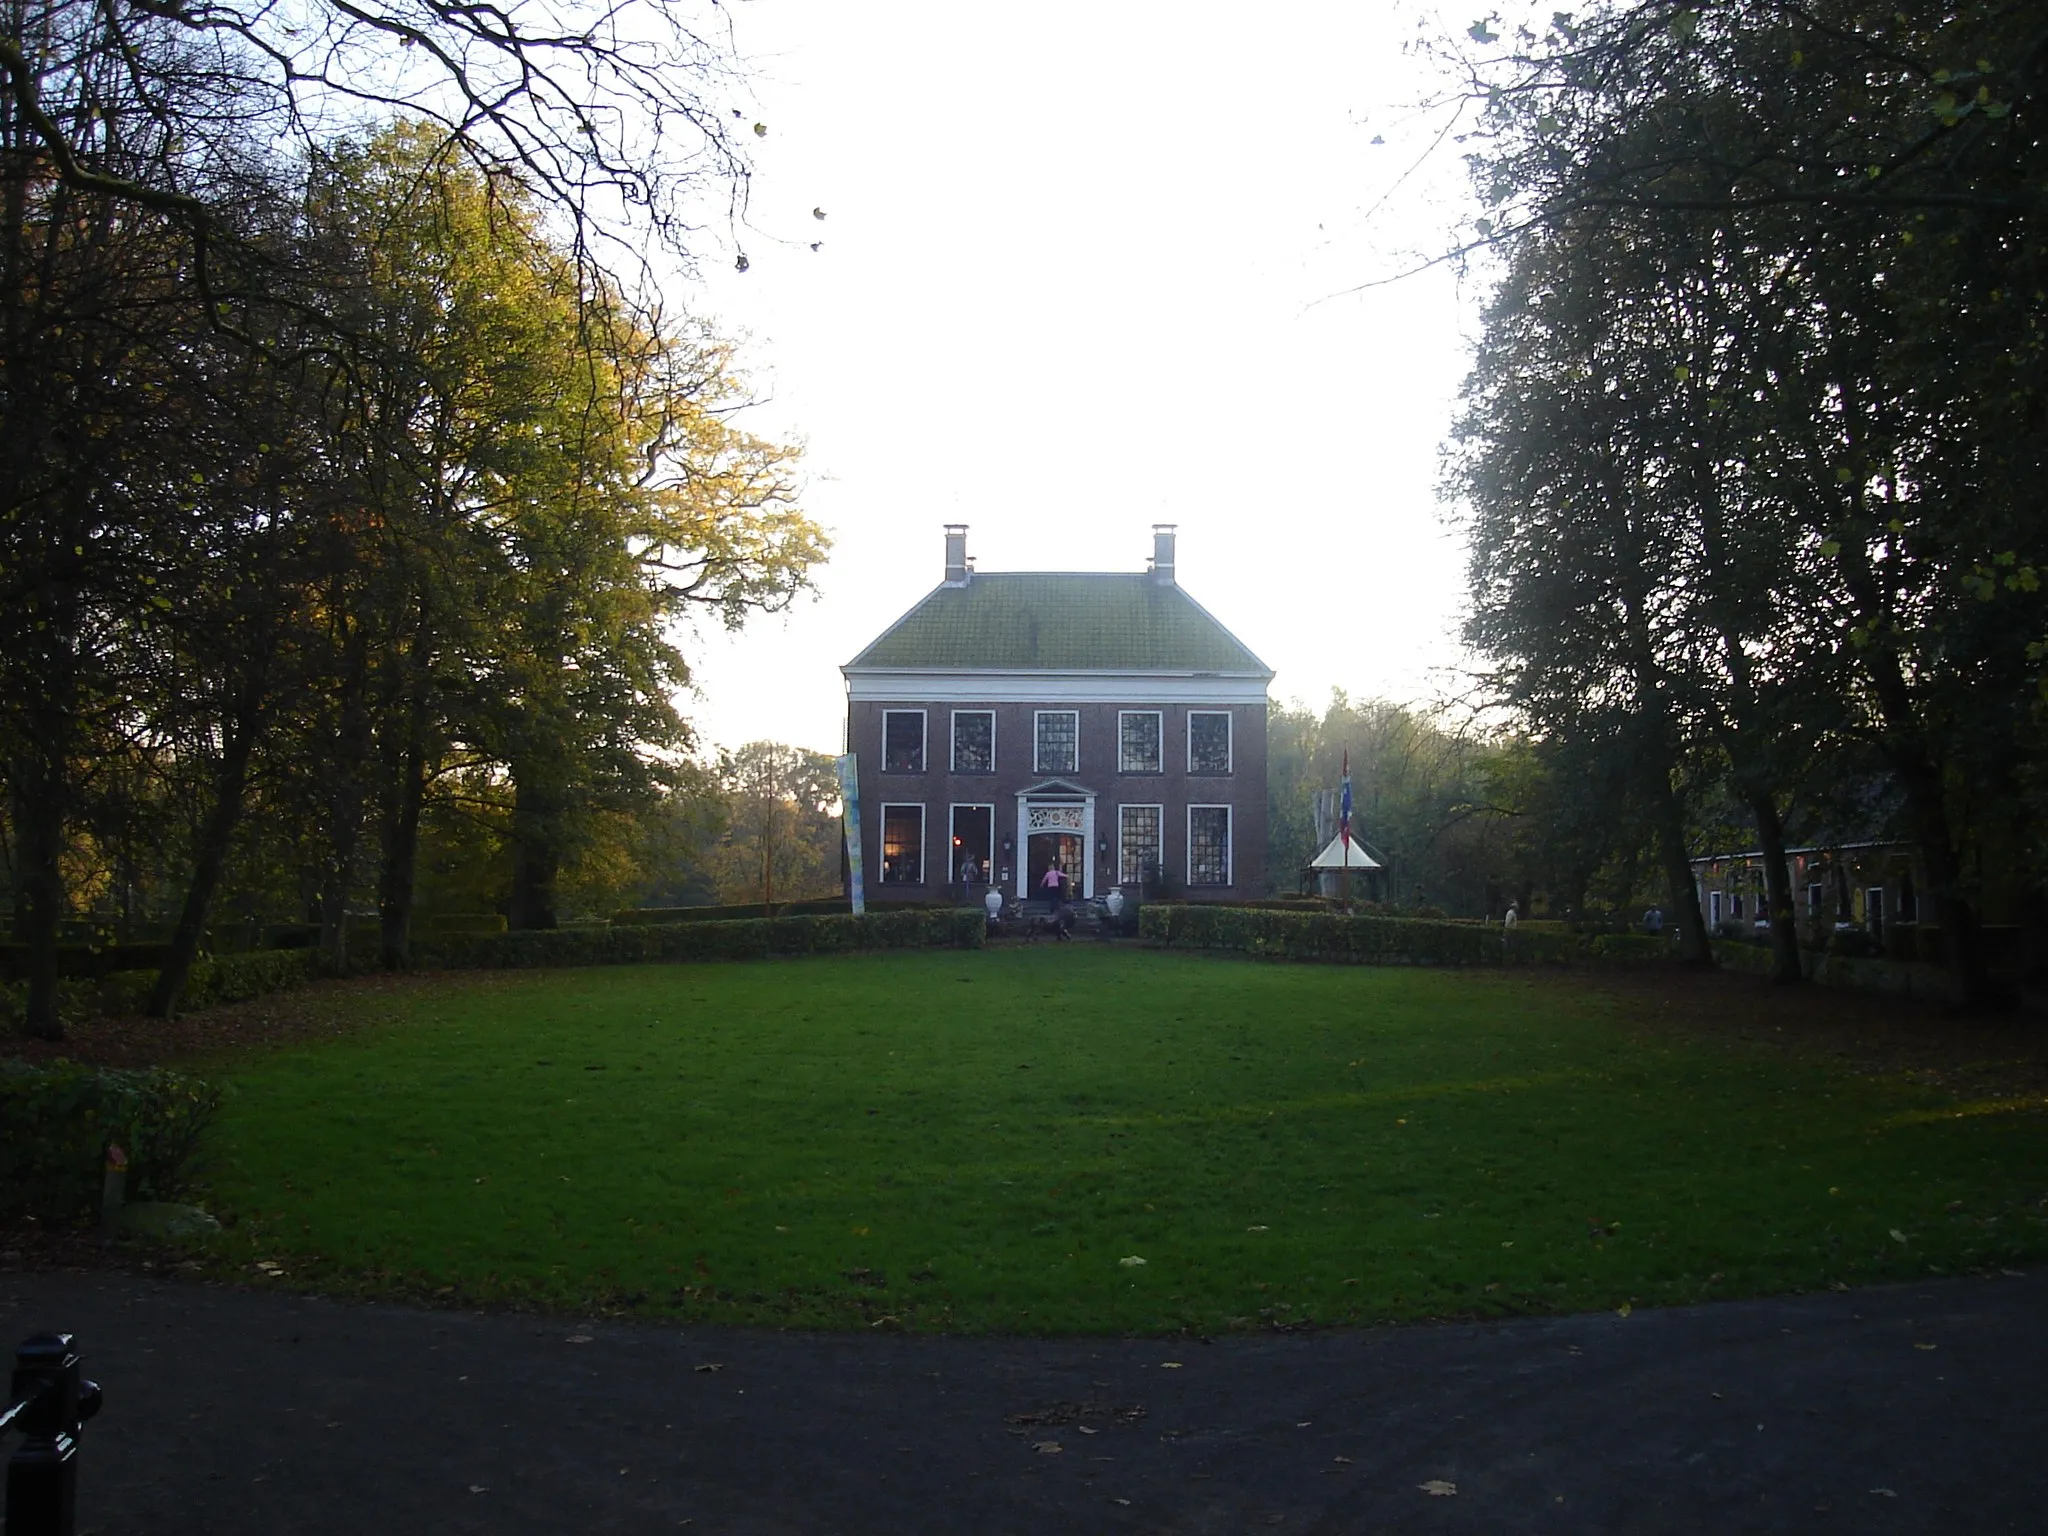 Photo showing: Photo taken by me of the Ennemaborg mansion in Midwolda, municipality of Scheemda, the Netherlands.